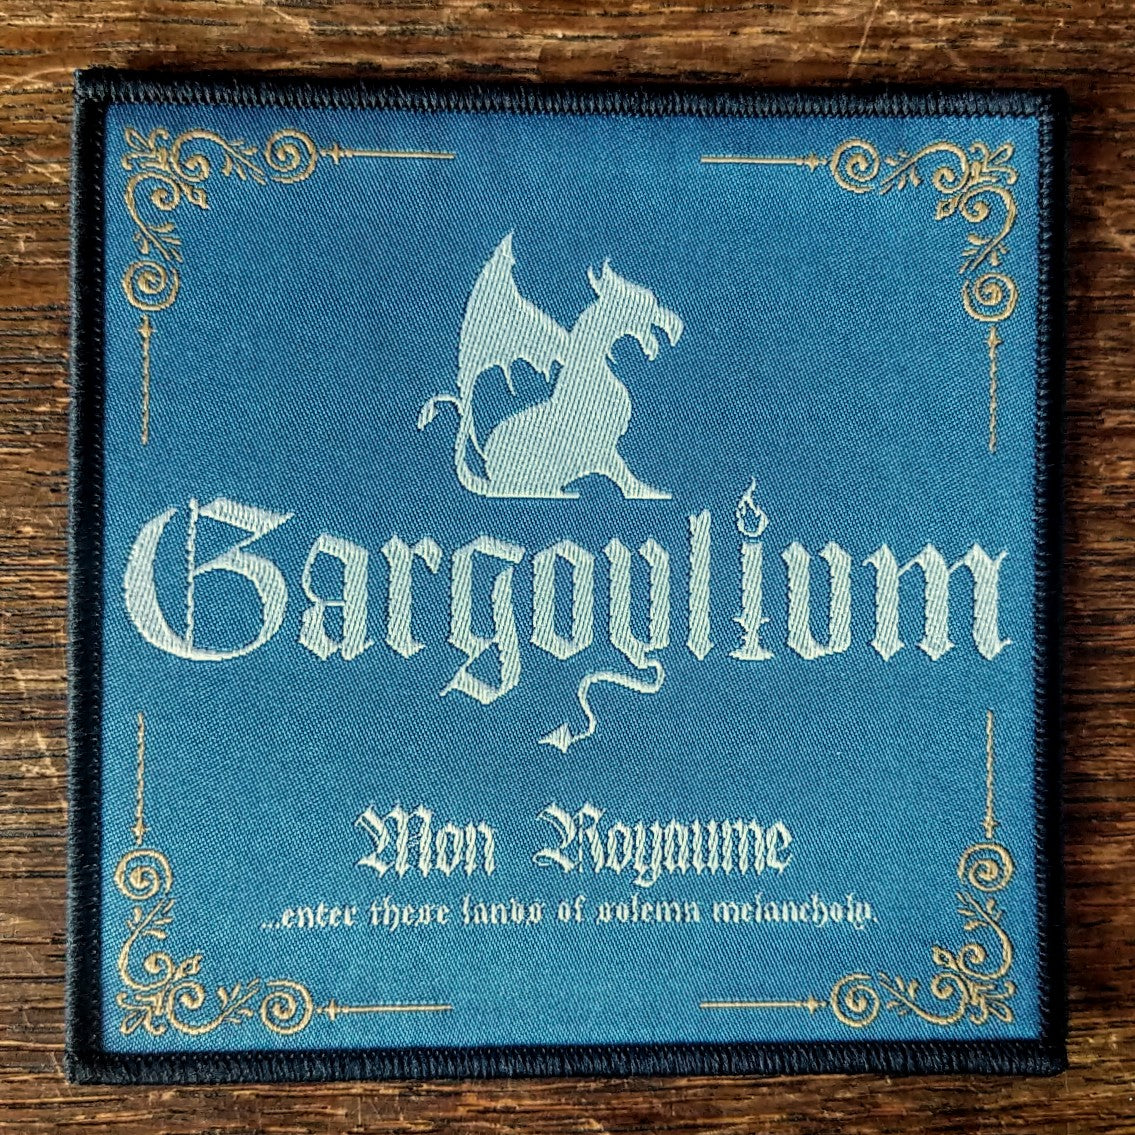 [SOLD OUT] GARGOYLIUM "Mon Royaume" Patch